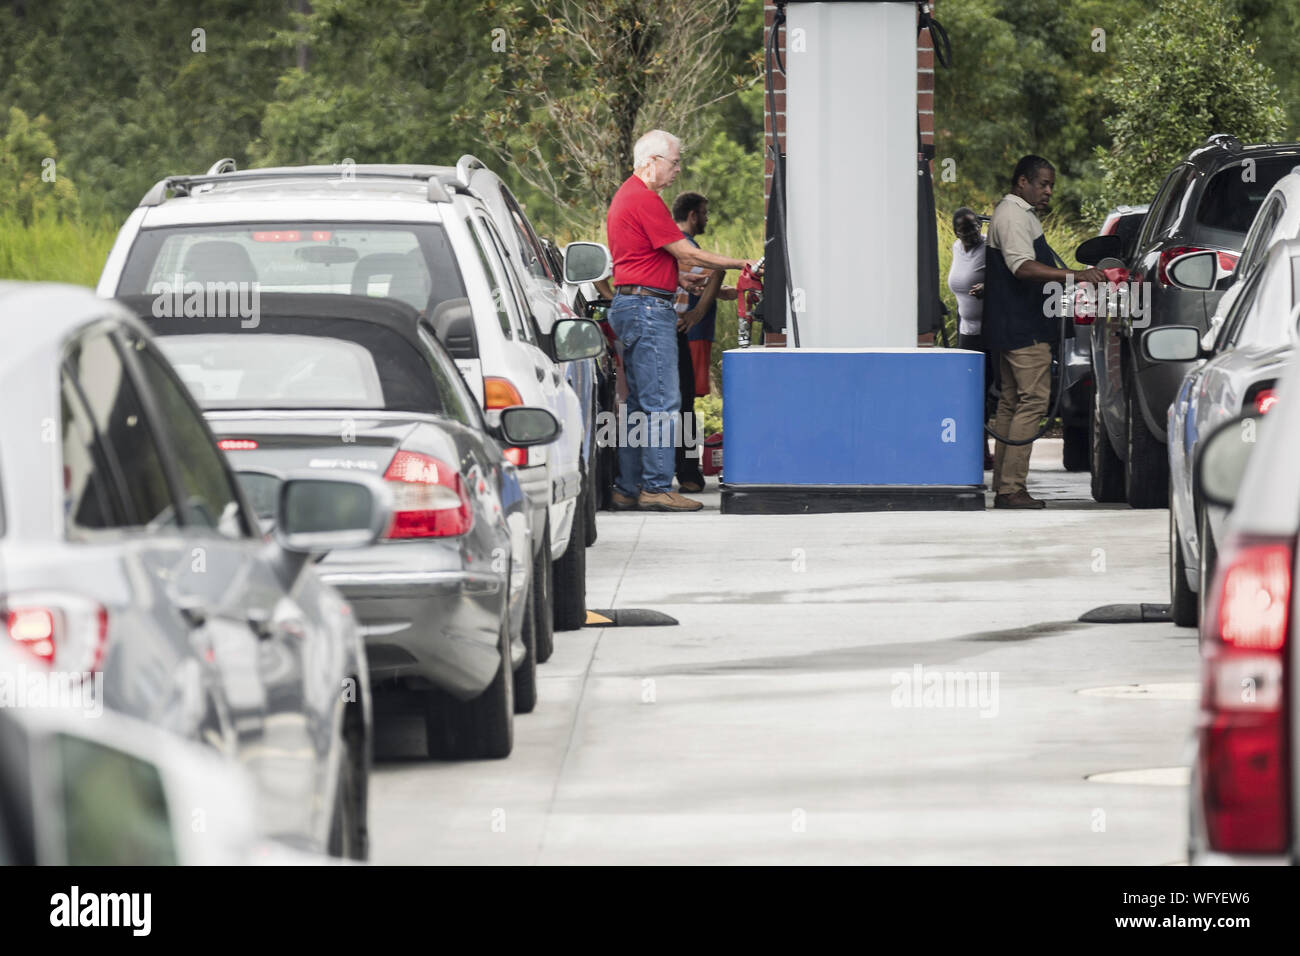 USA. 31st Aug, 2019. Cars line up at a gas station to fill-up in preparation for Hurricane Dorian on Saturday, August 31, 2019 in Mount Pleasant, South Carolina. The category 4 storm is expected to hit the Bahamas and then move north along the Eastern Seaboard. Credit: UPI/Alamy Live News Stock Photo